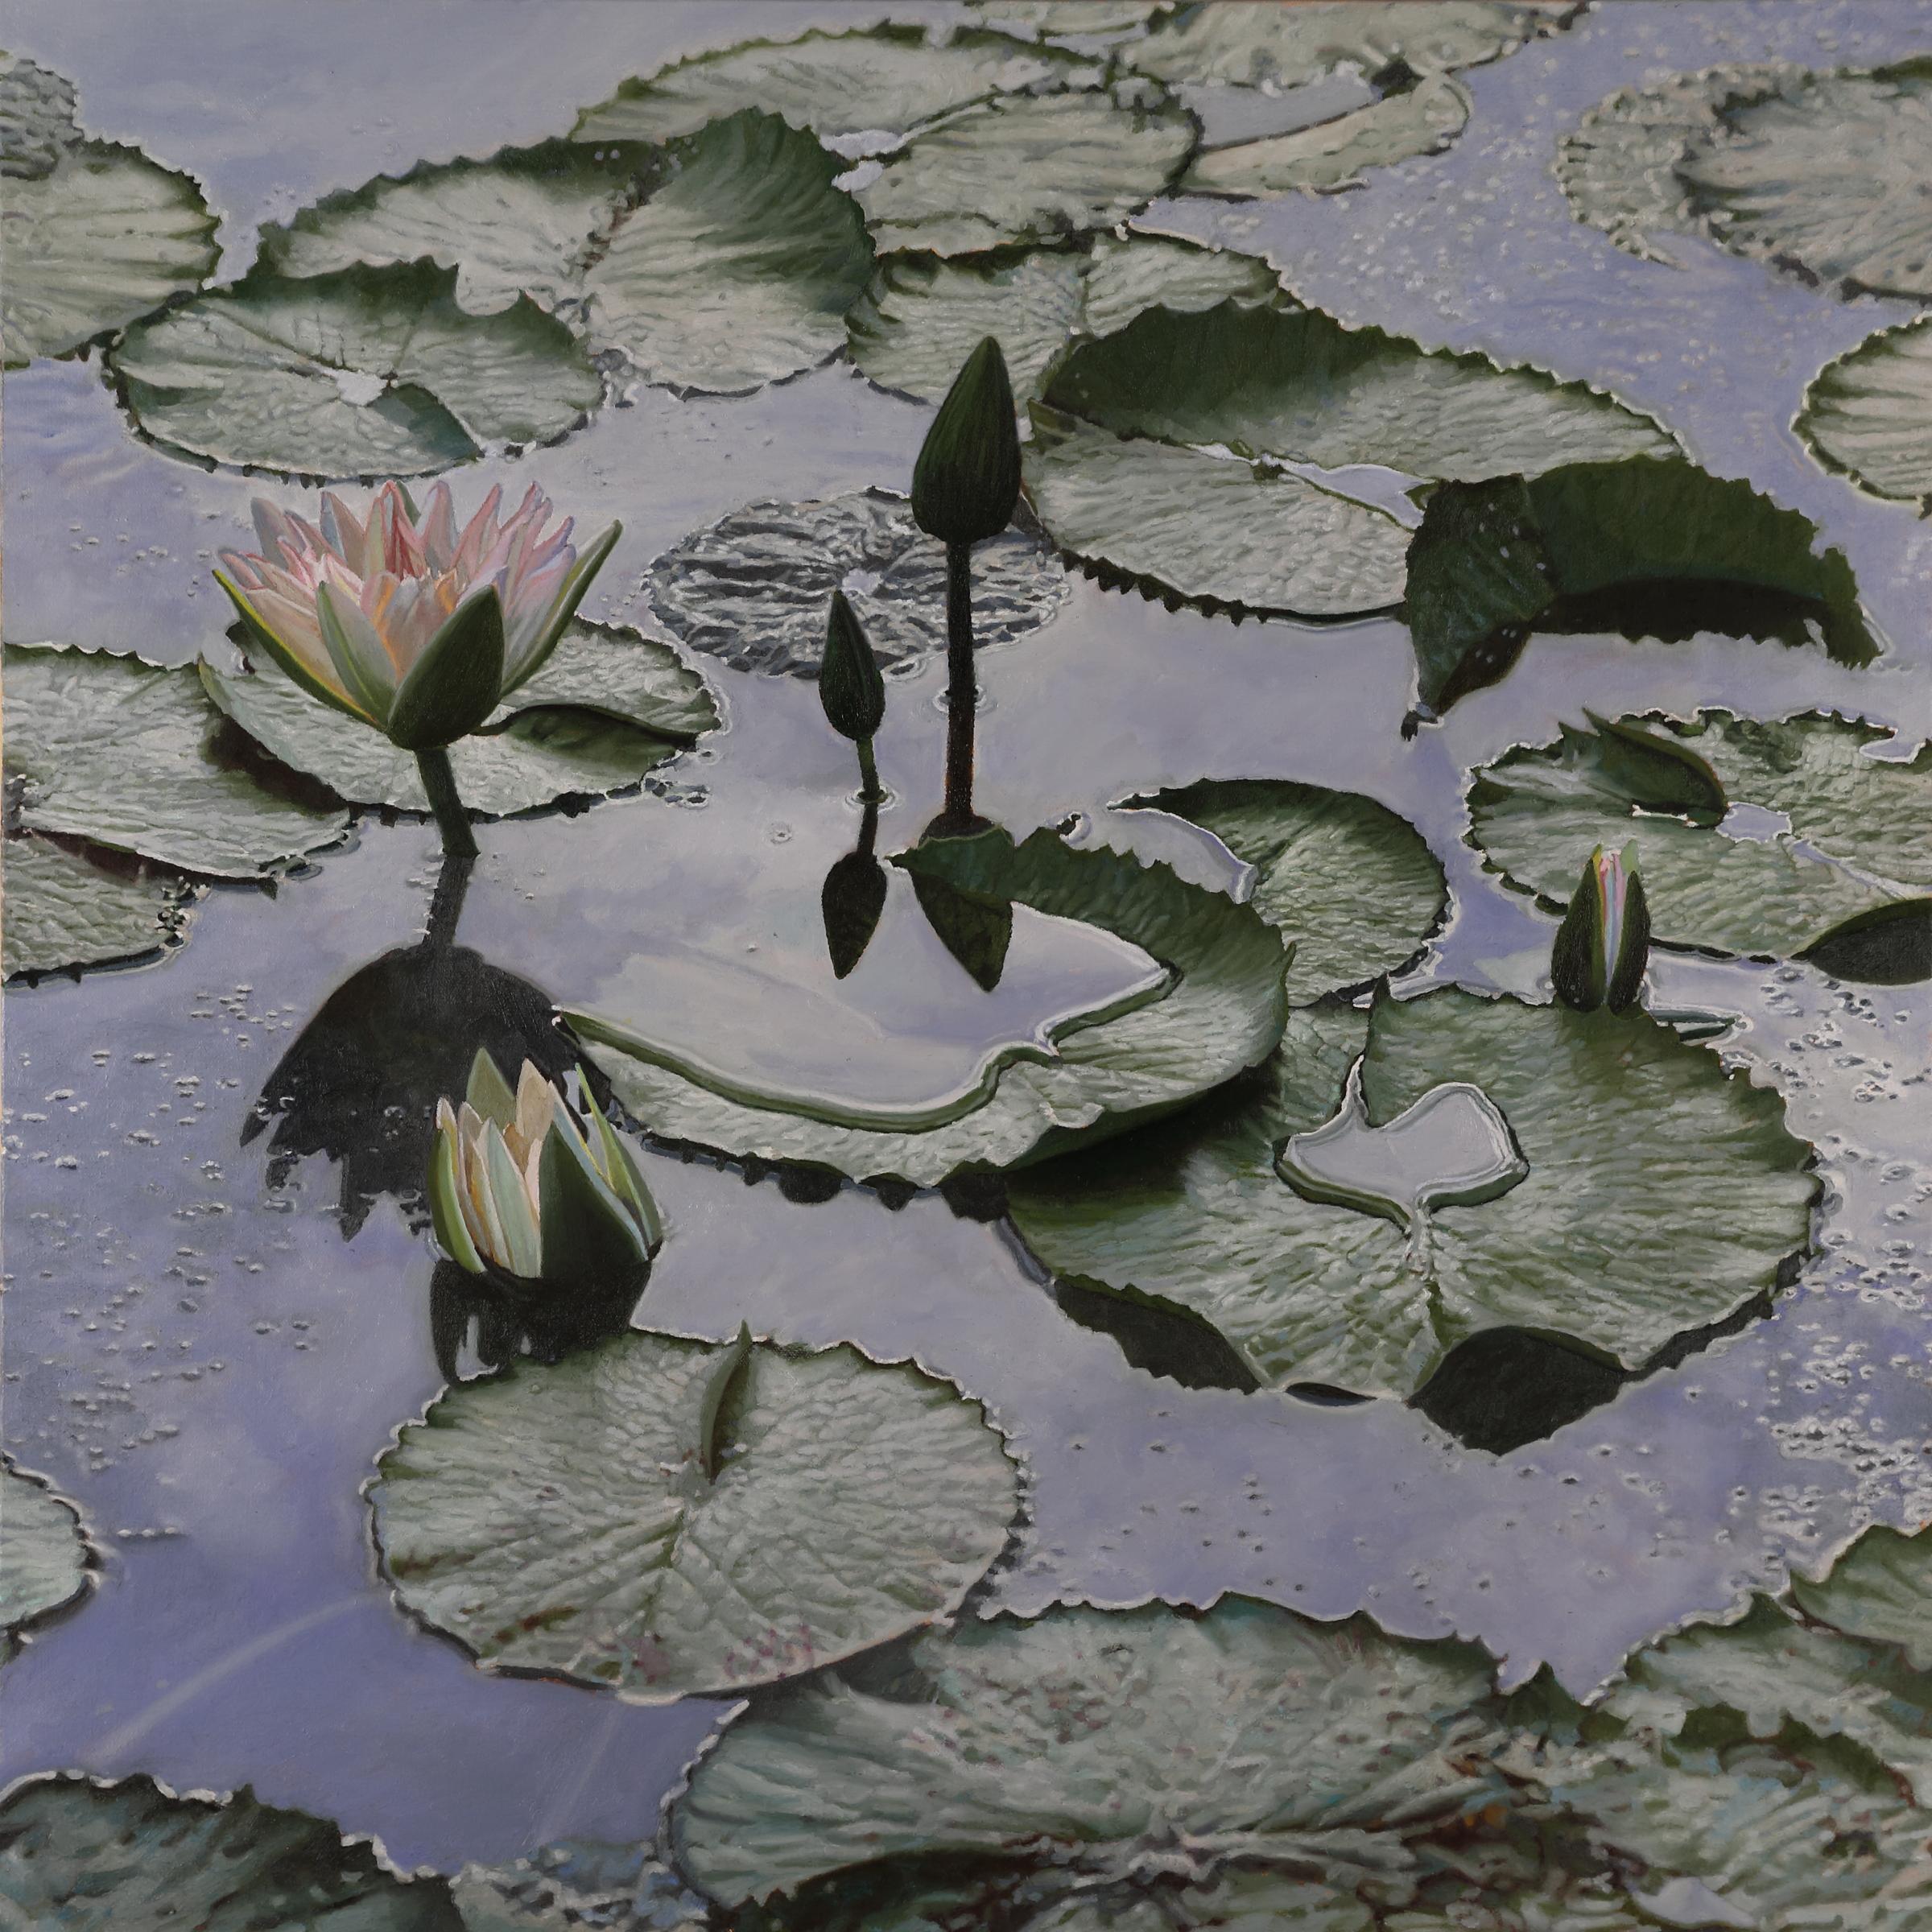 "Lilies After the Rain", Photorealistic Oil Painting on Canvas, Framed in Pine